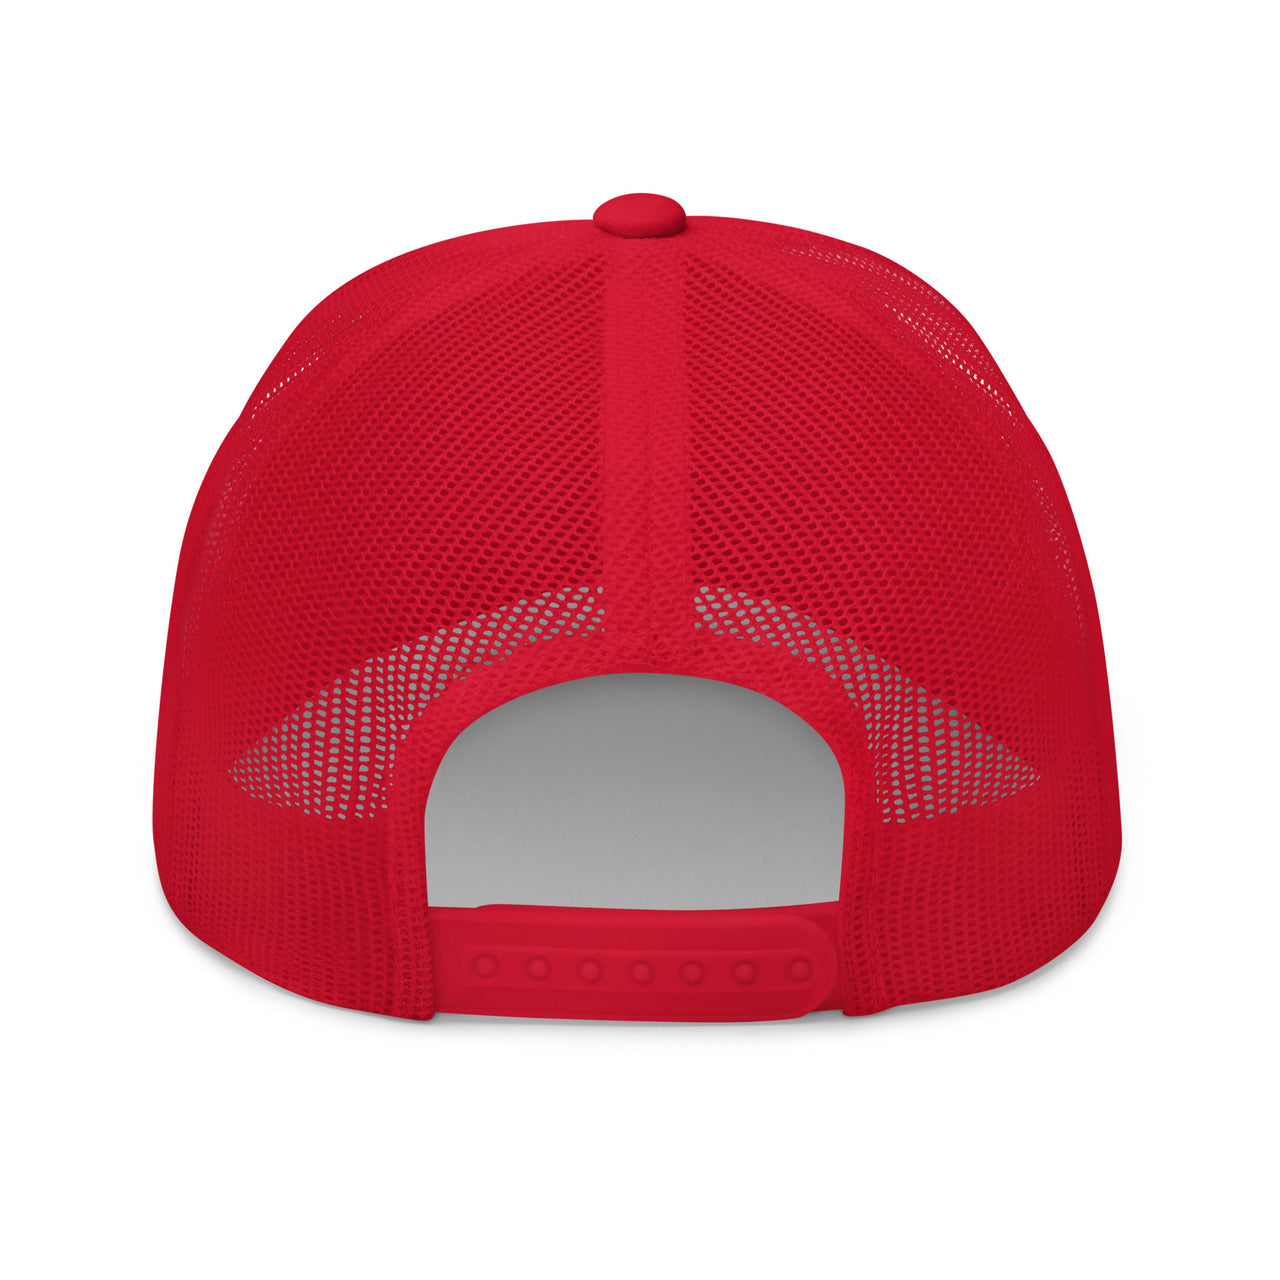 C10 Trucker hat in red back view